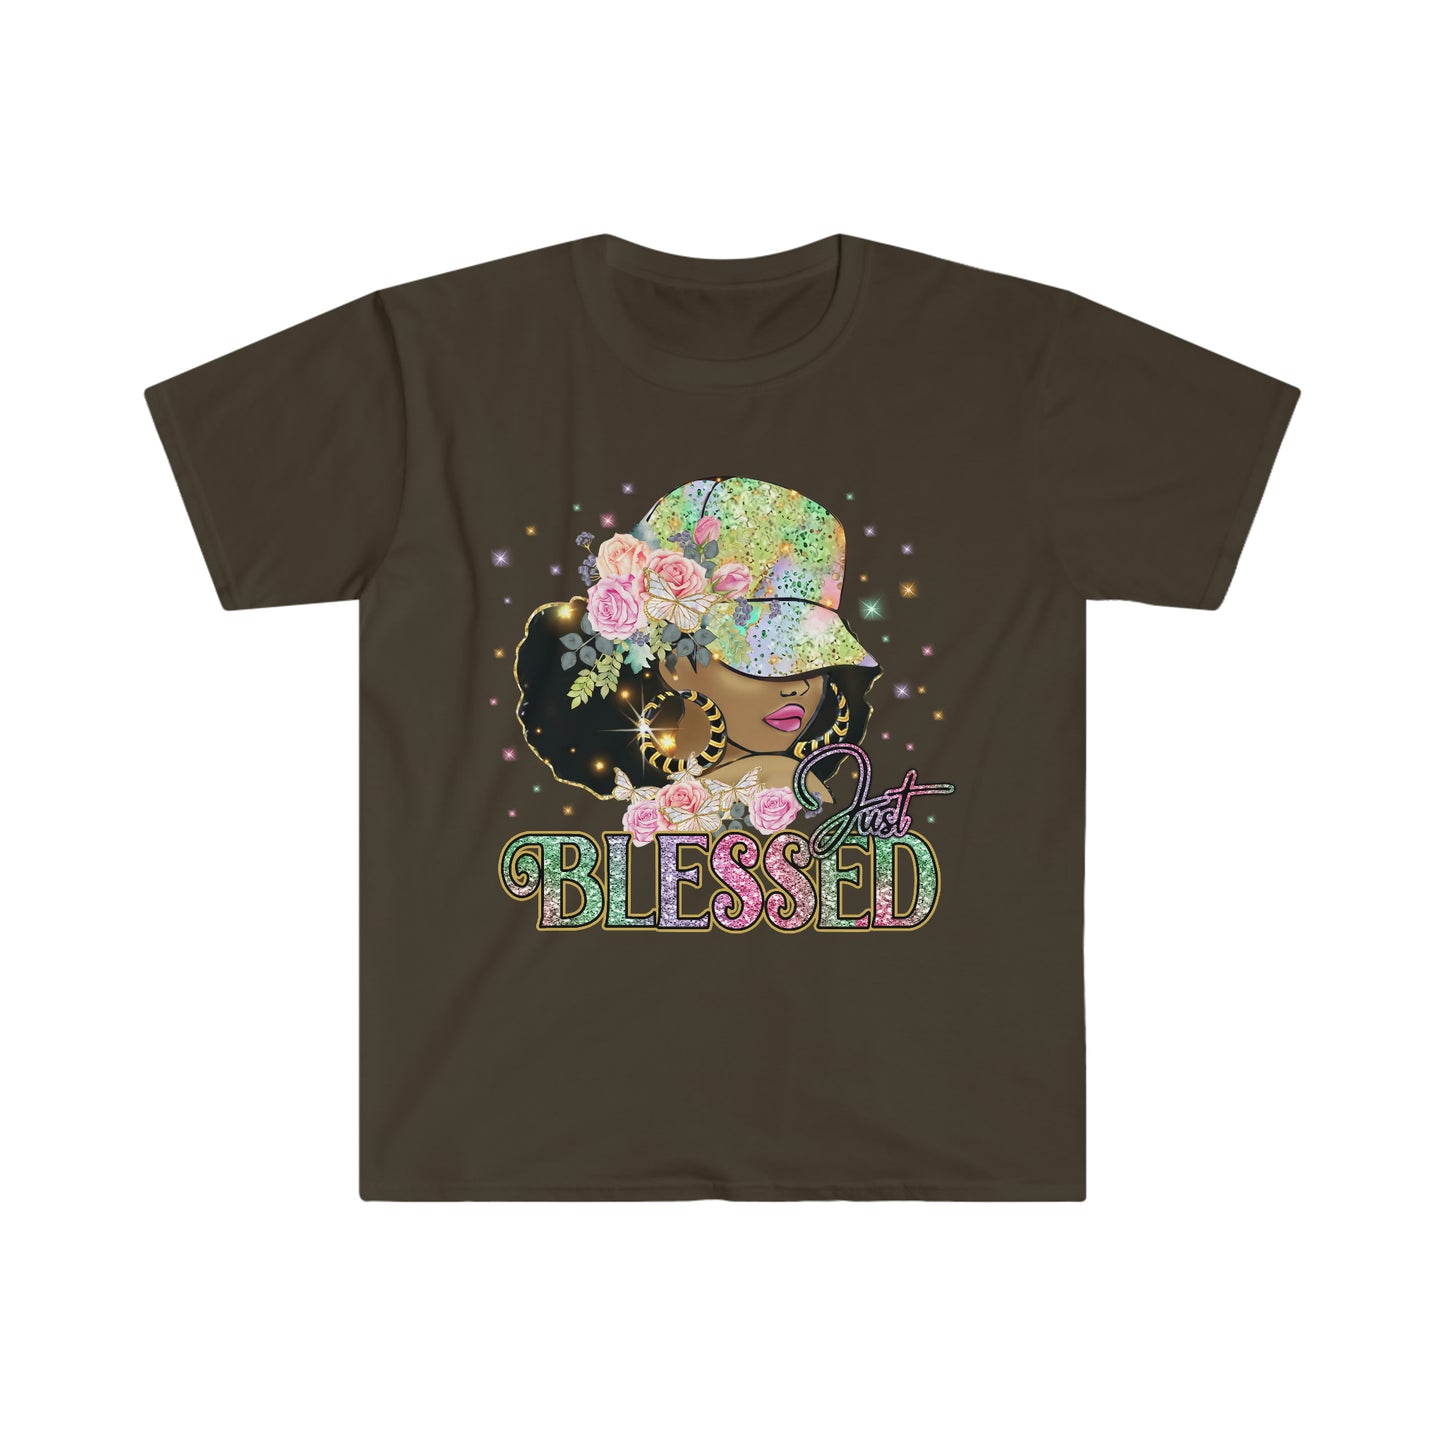 Just Blessed, Black Woman Christian Shirt